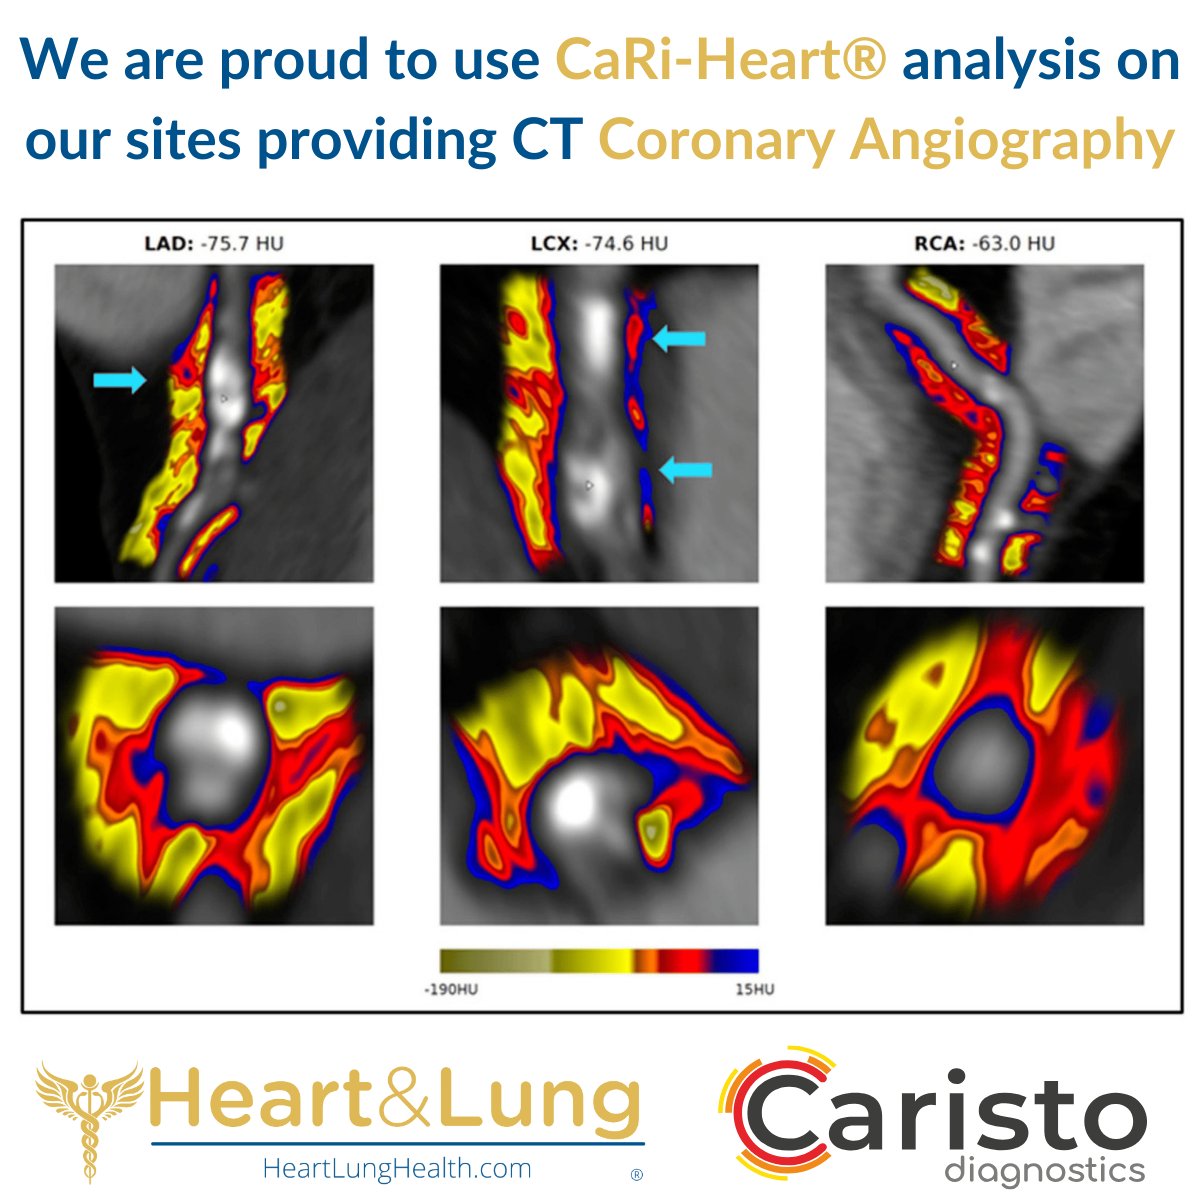 We are proud to be integrated with @CaristoHeart on our sites providing CT coronary angiography.

CaRi-Heart® analysis is a non-invasive #predictiveAI technology, providing individualised risk of fatal heart attack over 8 years.

Email info@heartlunghealth.com for more details 🫀